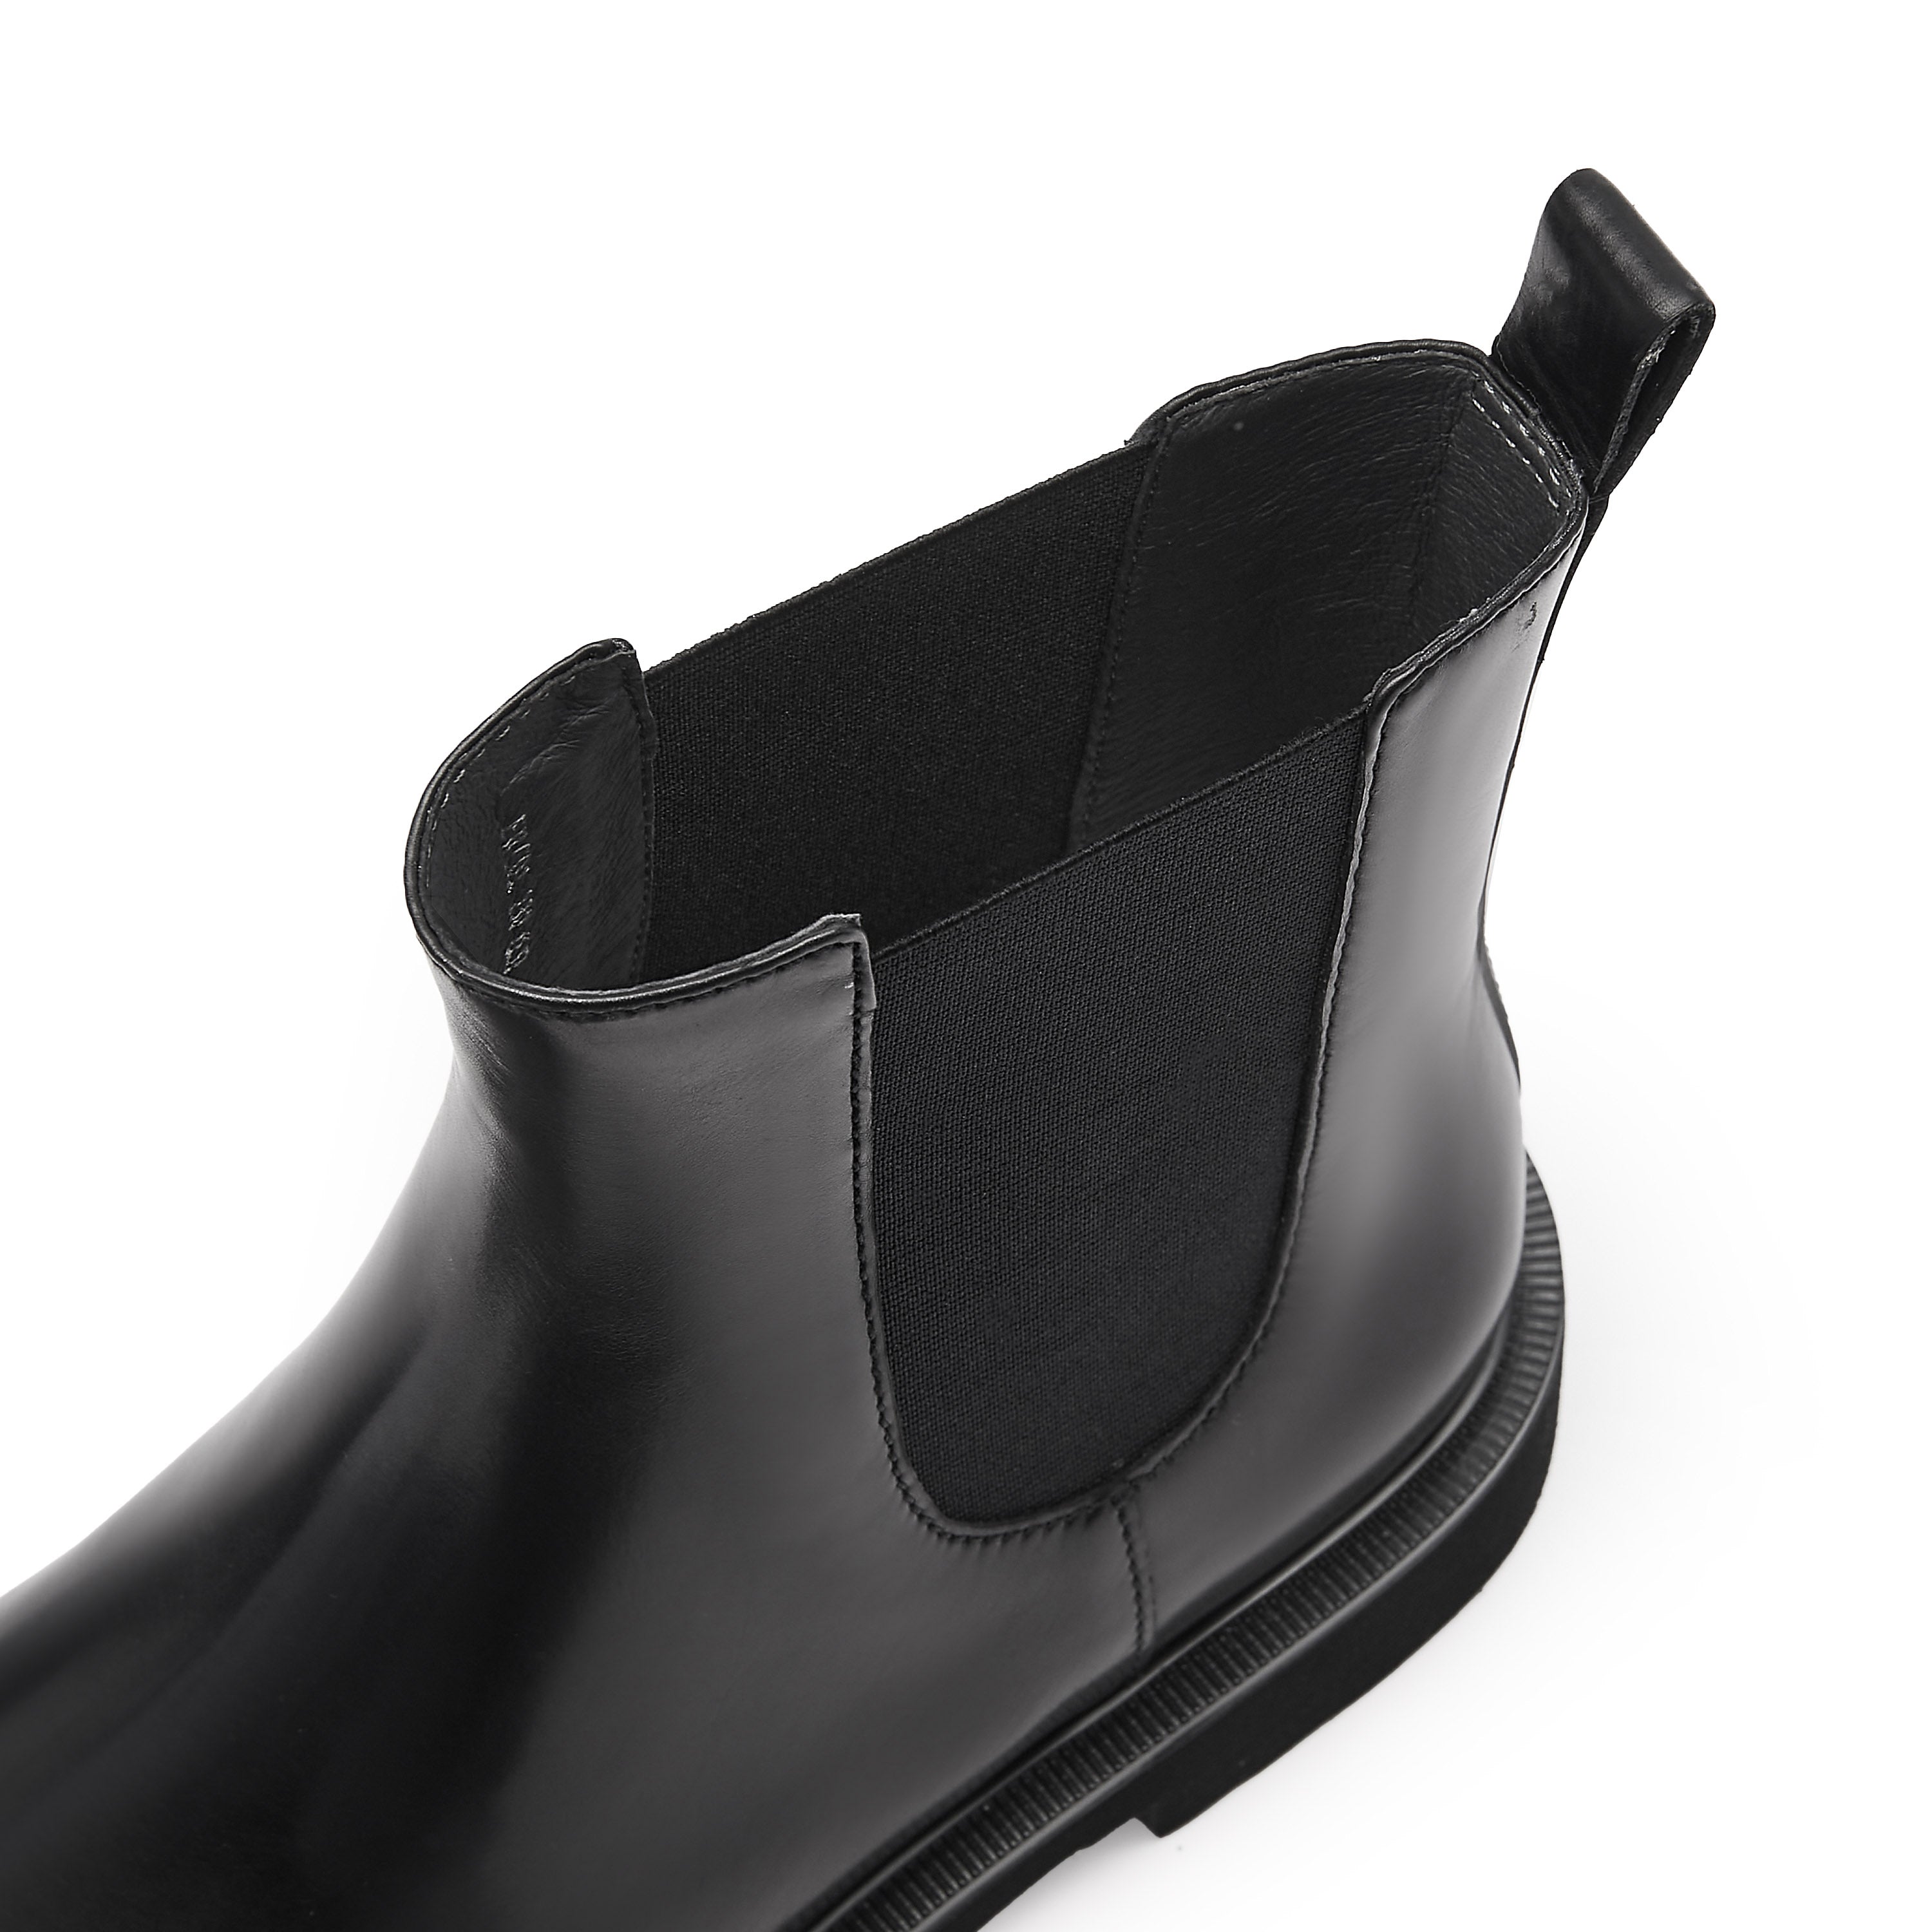 Black Leather Calf Charles Boots